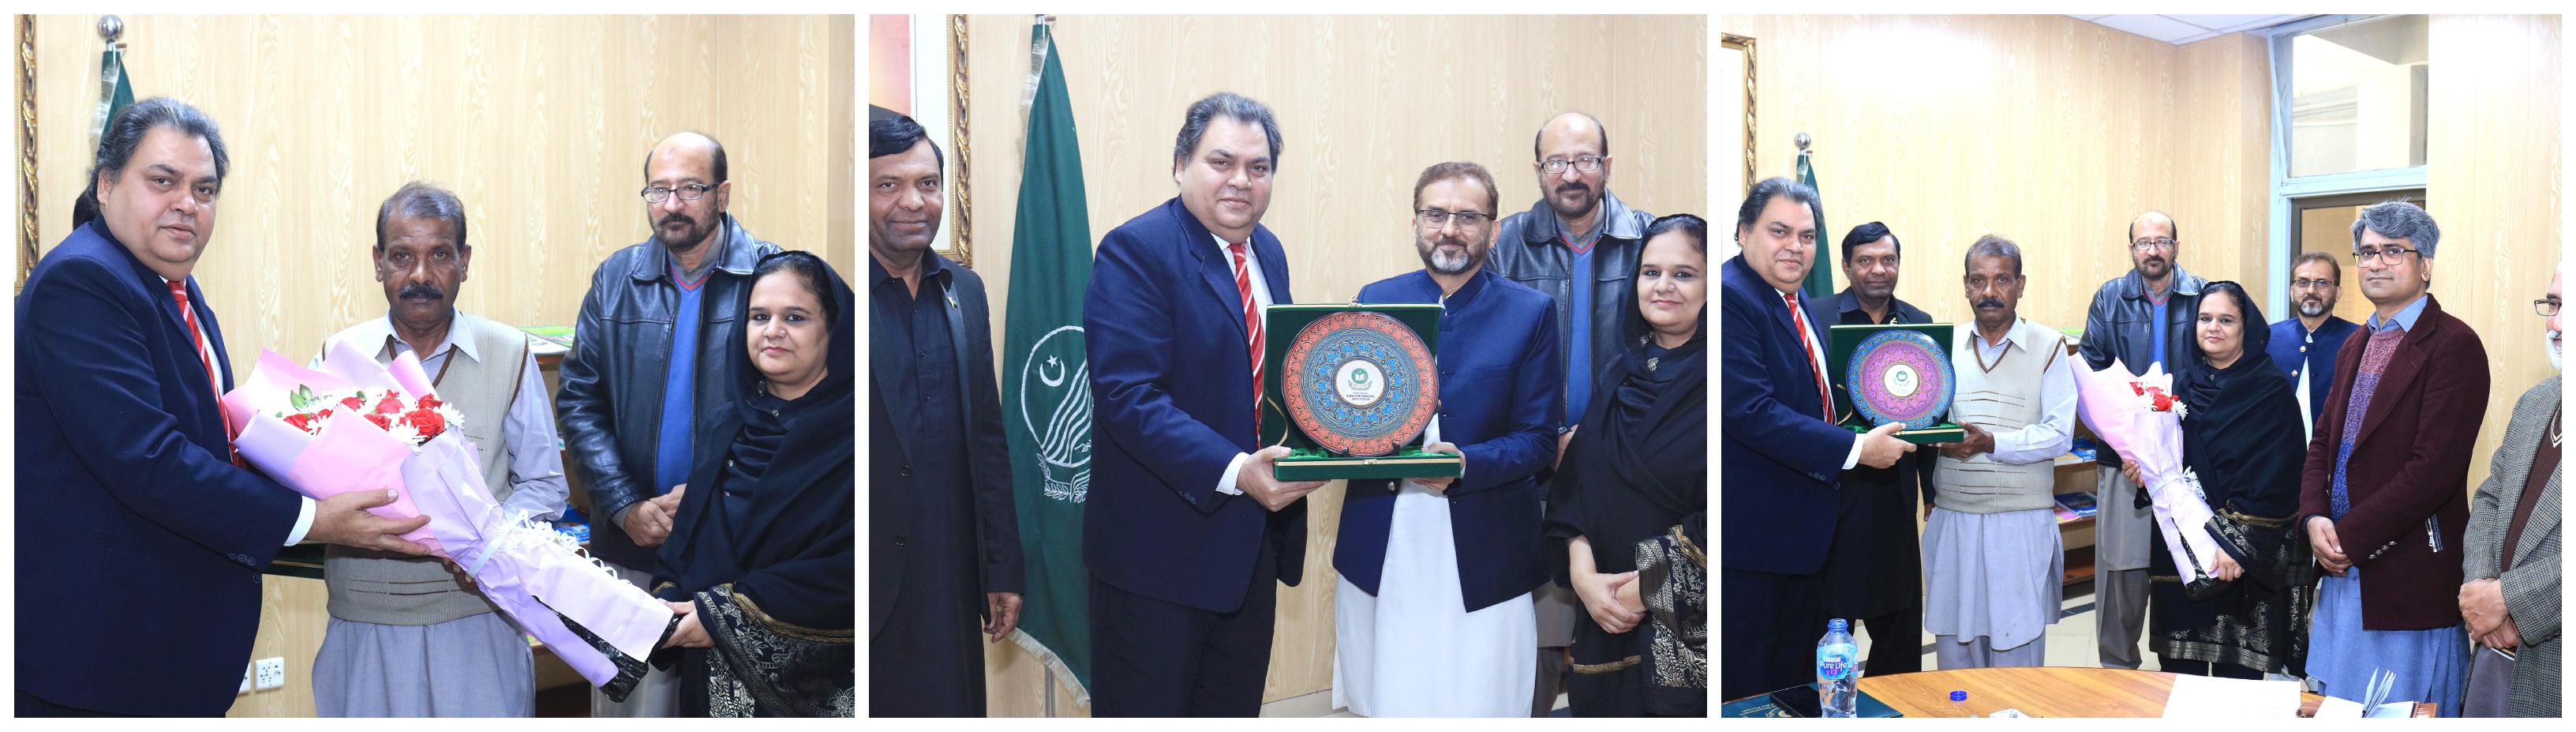 DG QAED presented shield and flowers